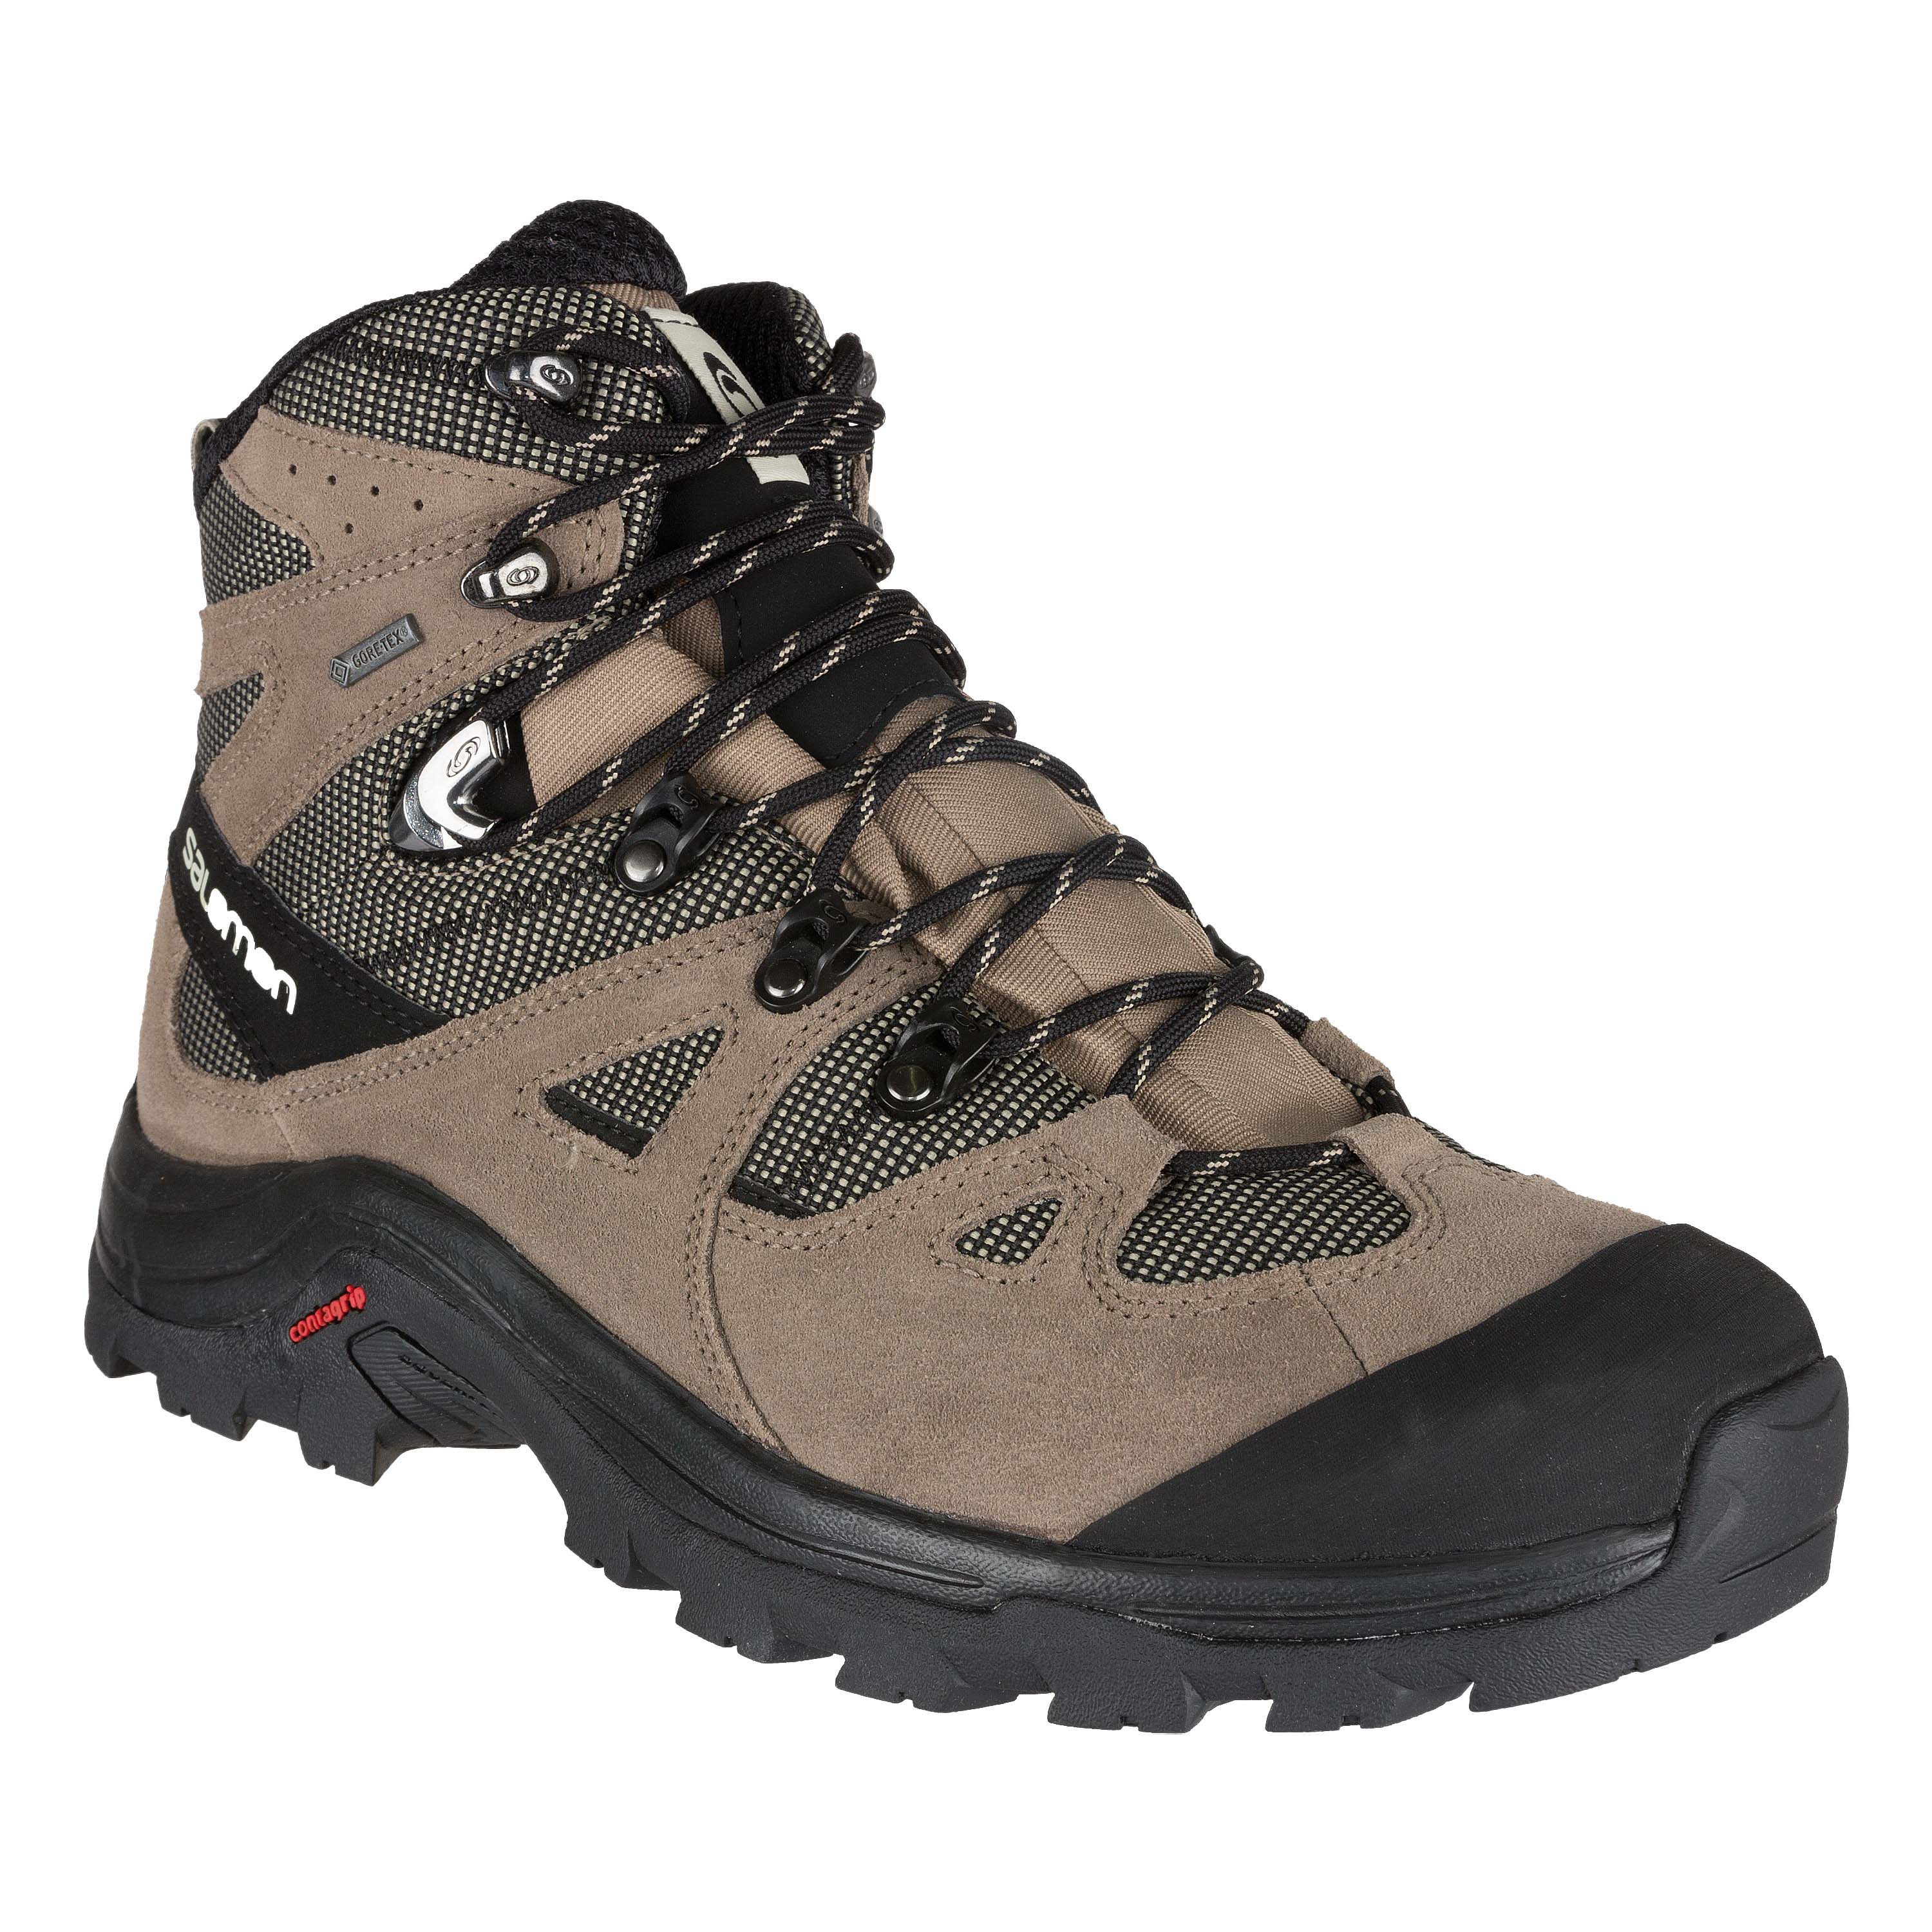 Salomon Discovery GTX brown | Salomon Discovery GTX brown | Hiking Shoes | Shoes | Footwear |